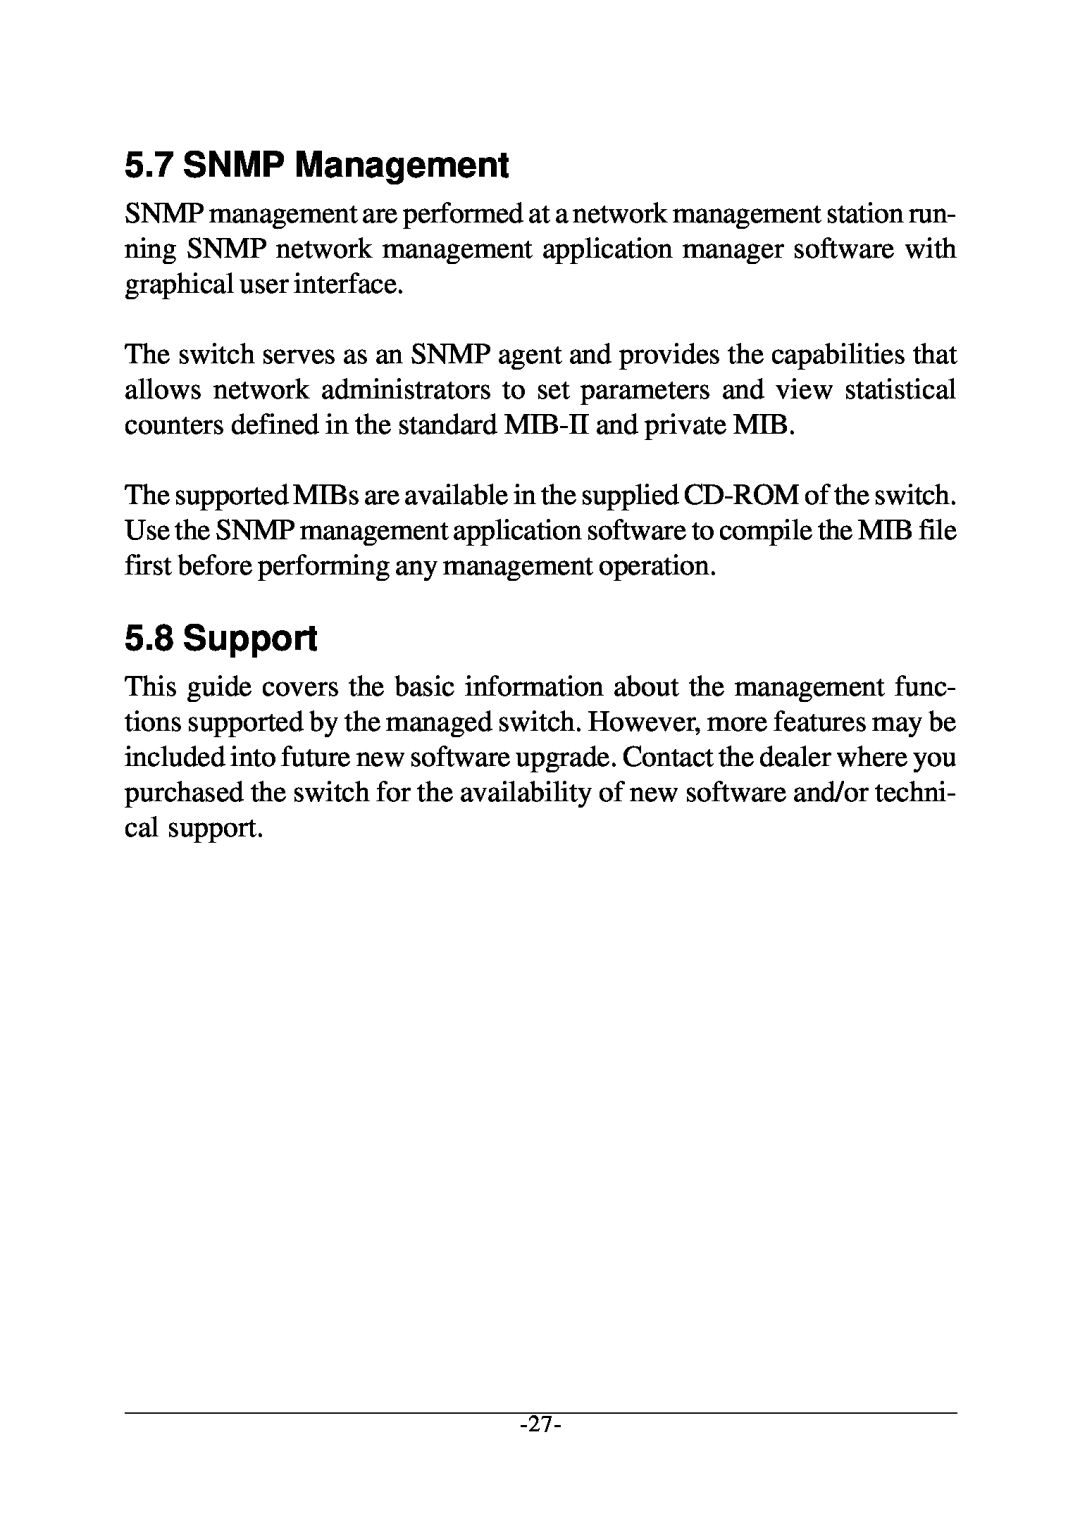 Xerox KS-801 operation manual SNMP Management, Support 